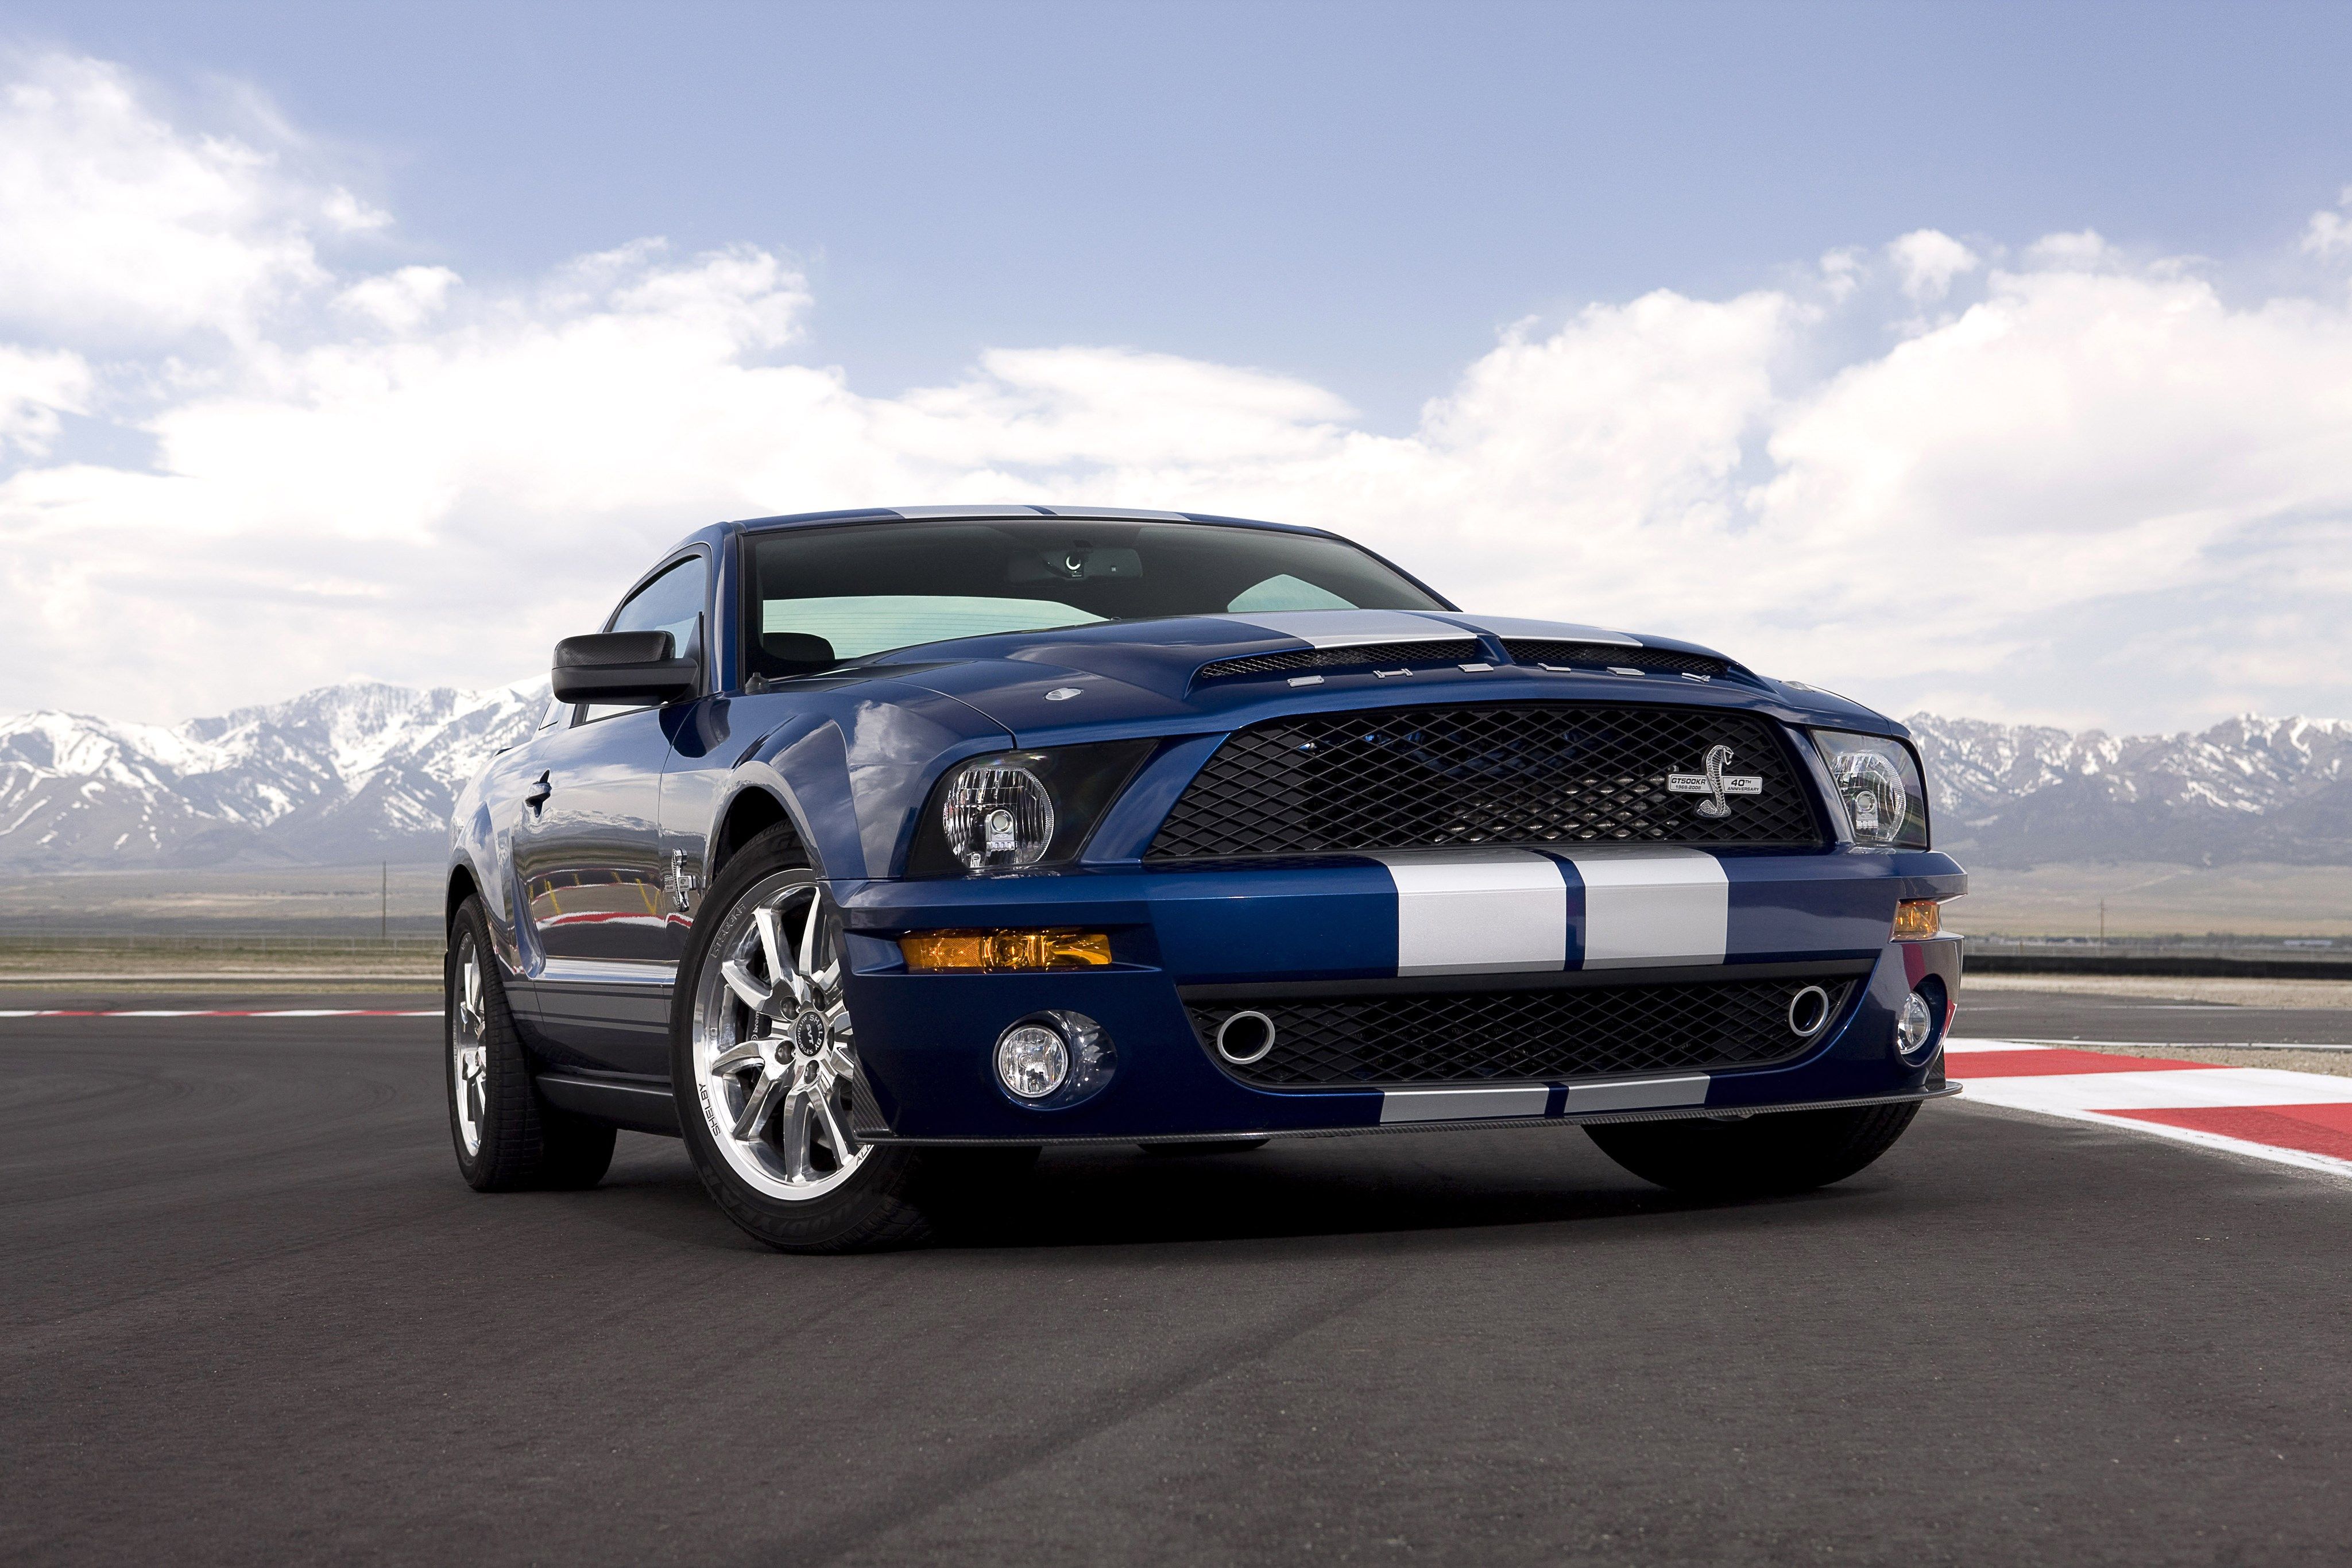 ford mustang shelby gt500 4k ultra HD wallpaper High quality walls